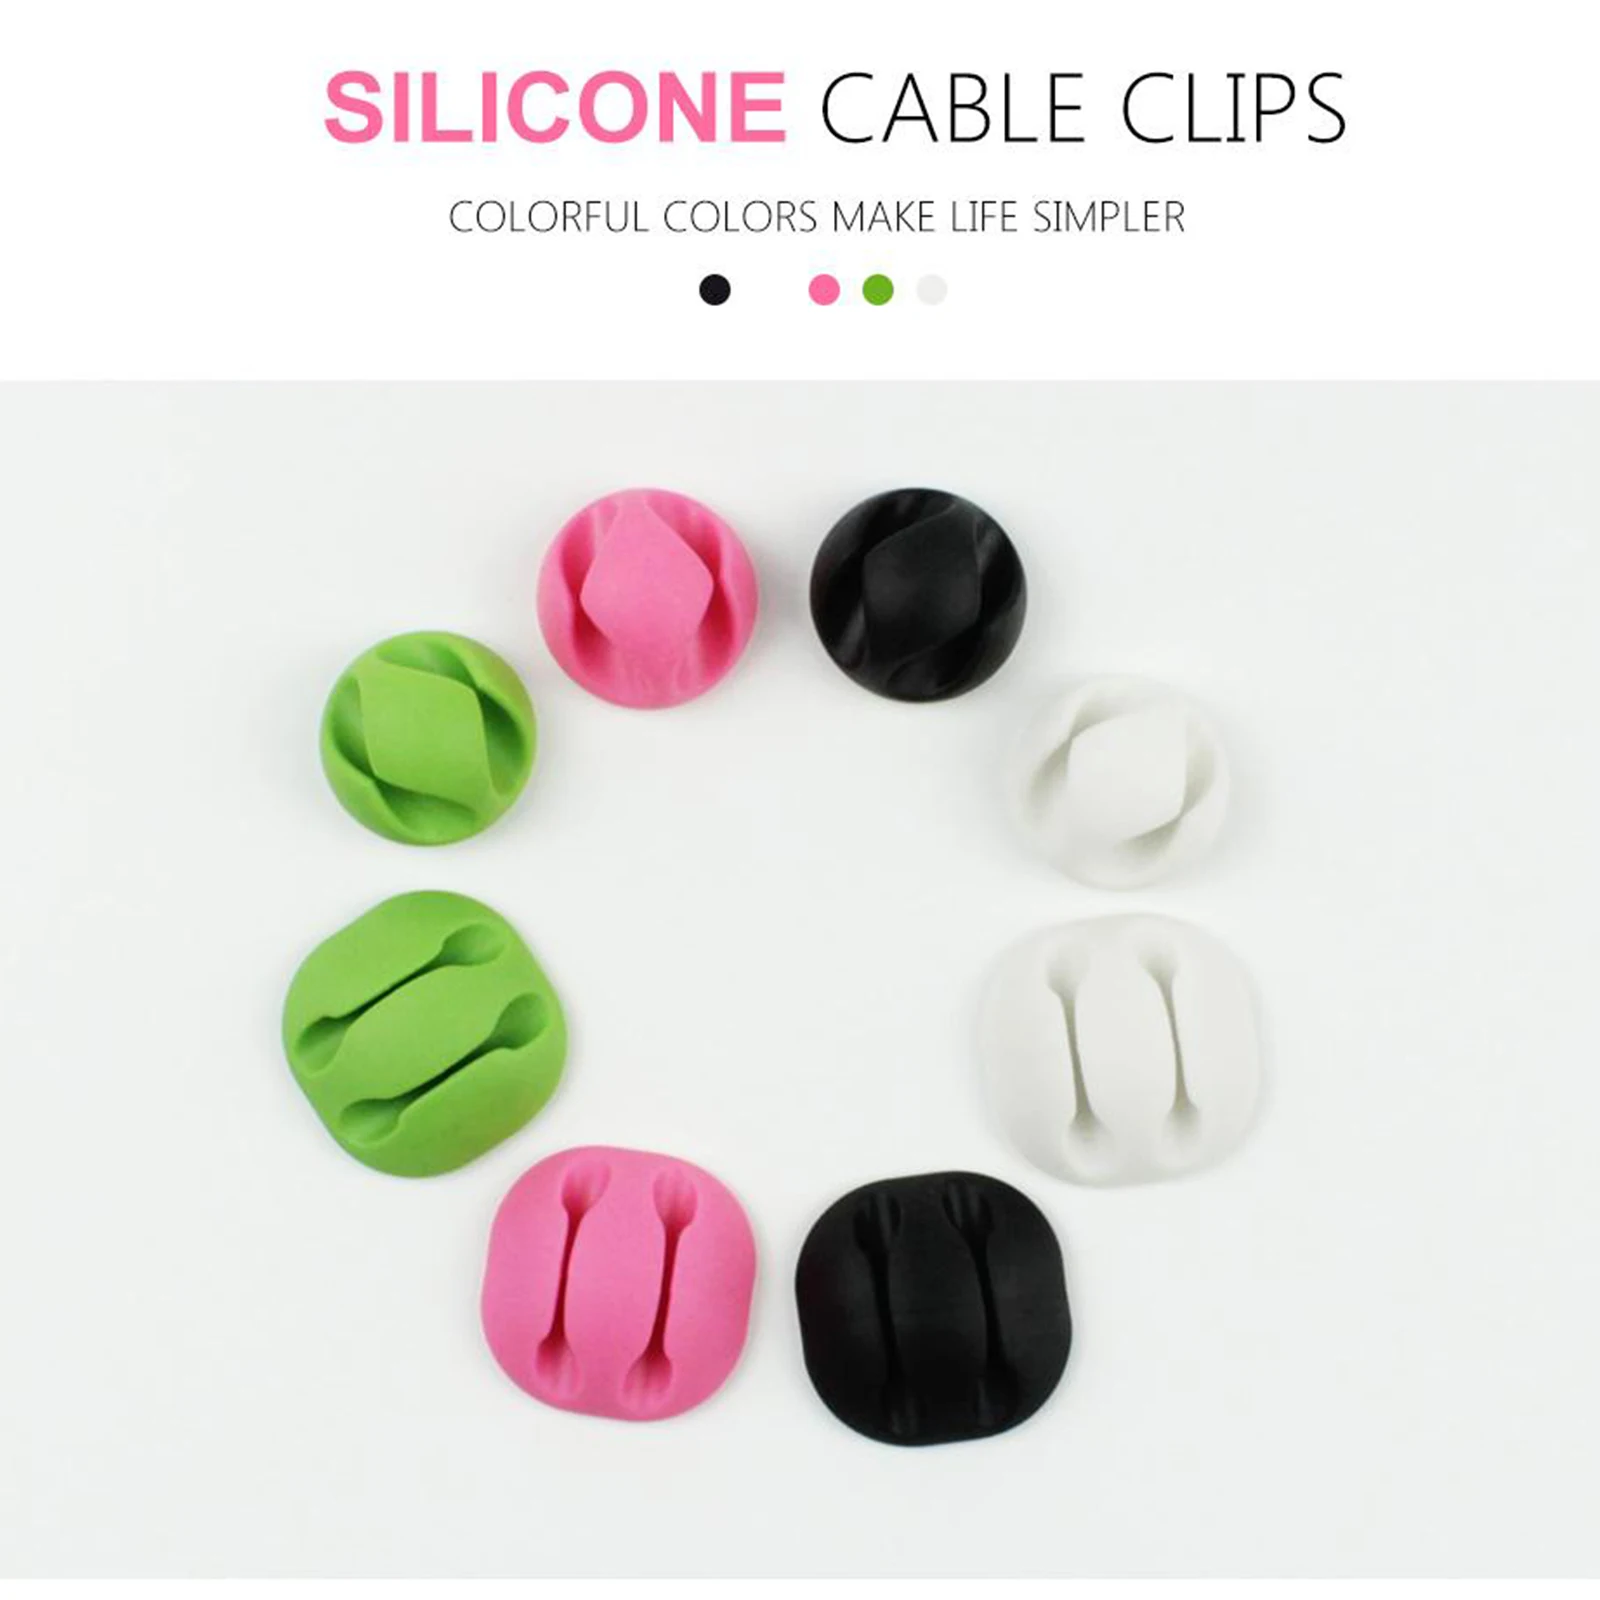 10pcs Cable Clip Desk Desktop Wall Winder Earphone Cord Lead Organizer Wire USB Charger Wire Holder Clips Kit Cord Management